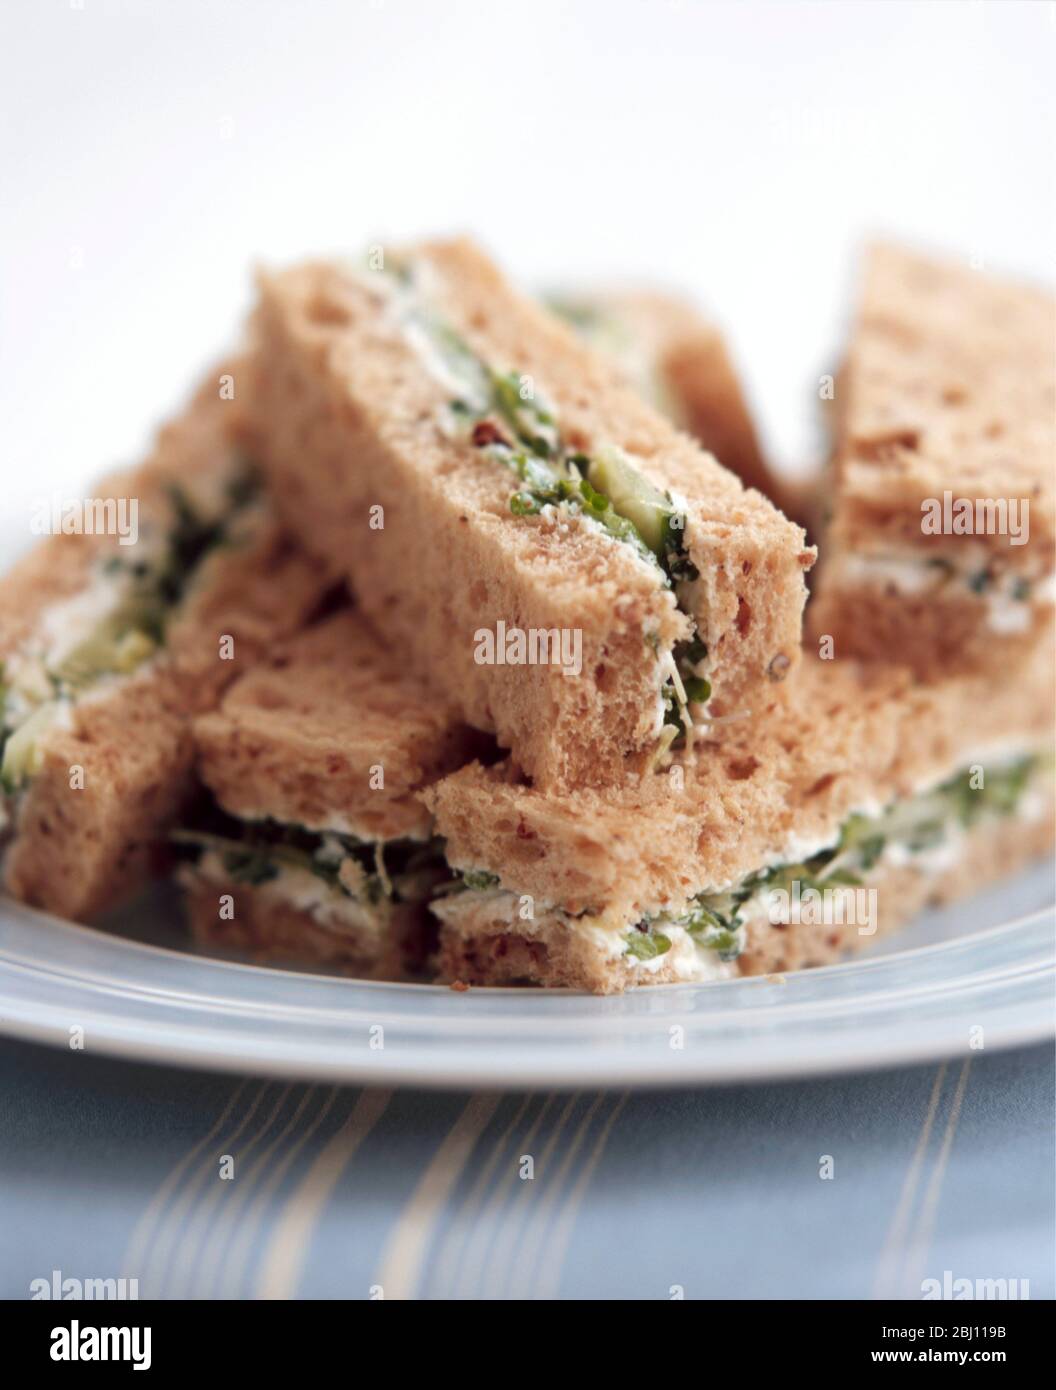 Little sandwiches made of brown bread, cut in fingers with cream cheese, cucumber, cress and sundried tomatoes - Stock Photo